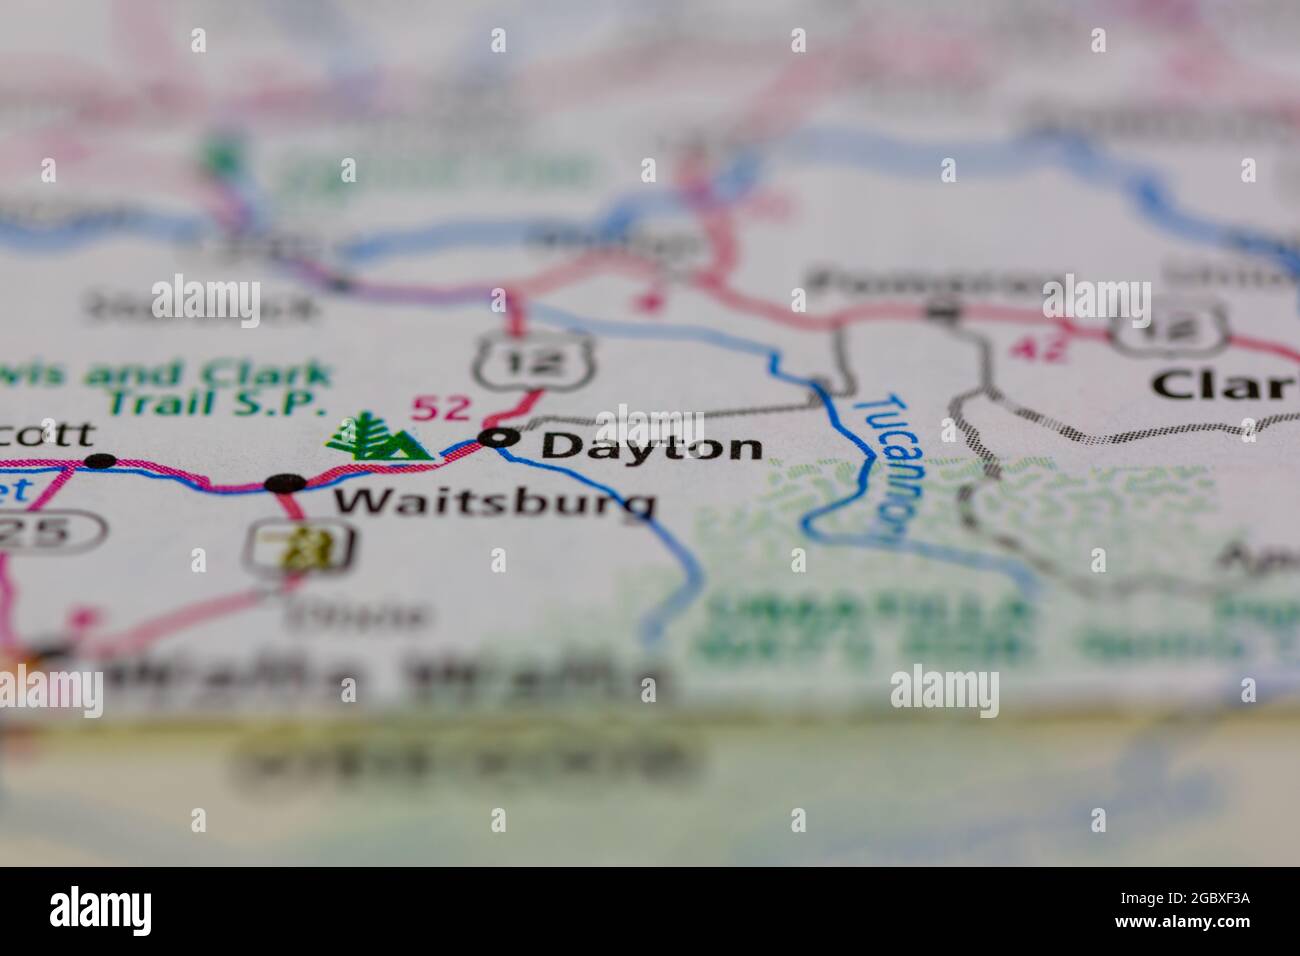 Dayton Washington State USA shown on a road map or Geography map Stock Photo